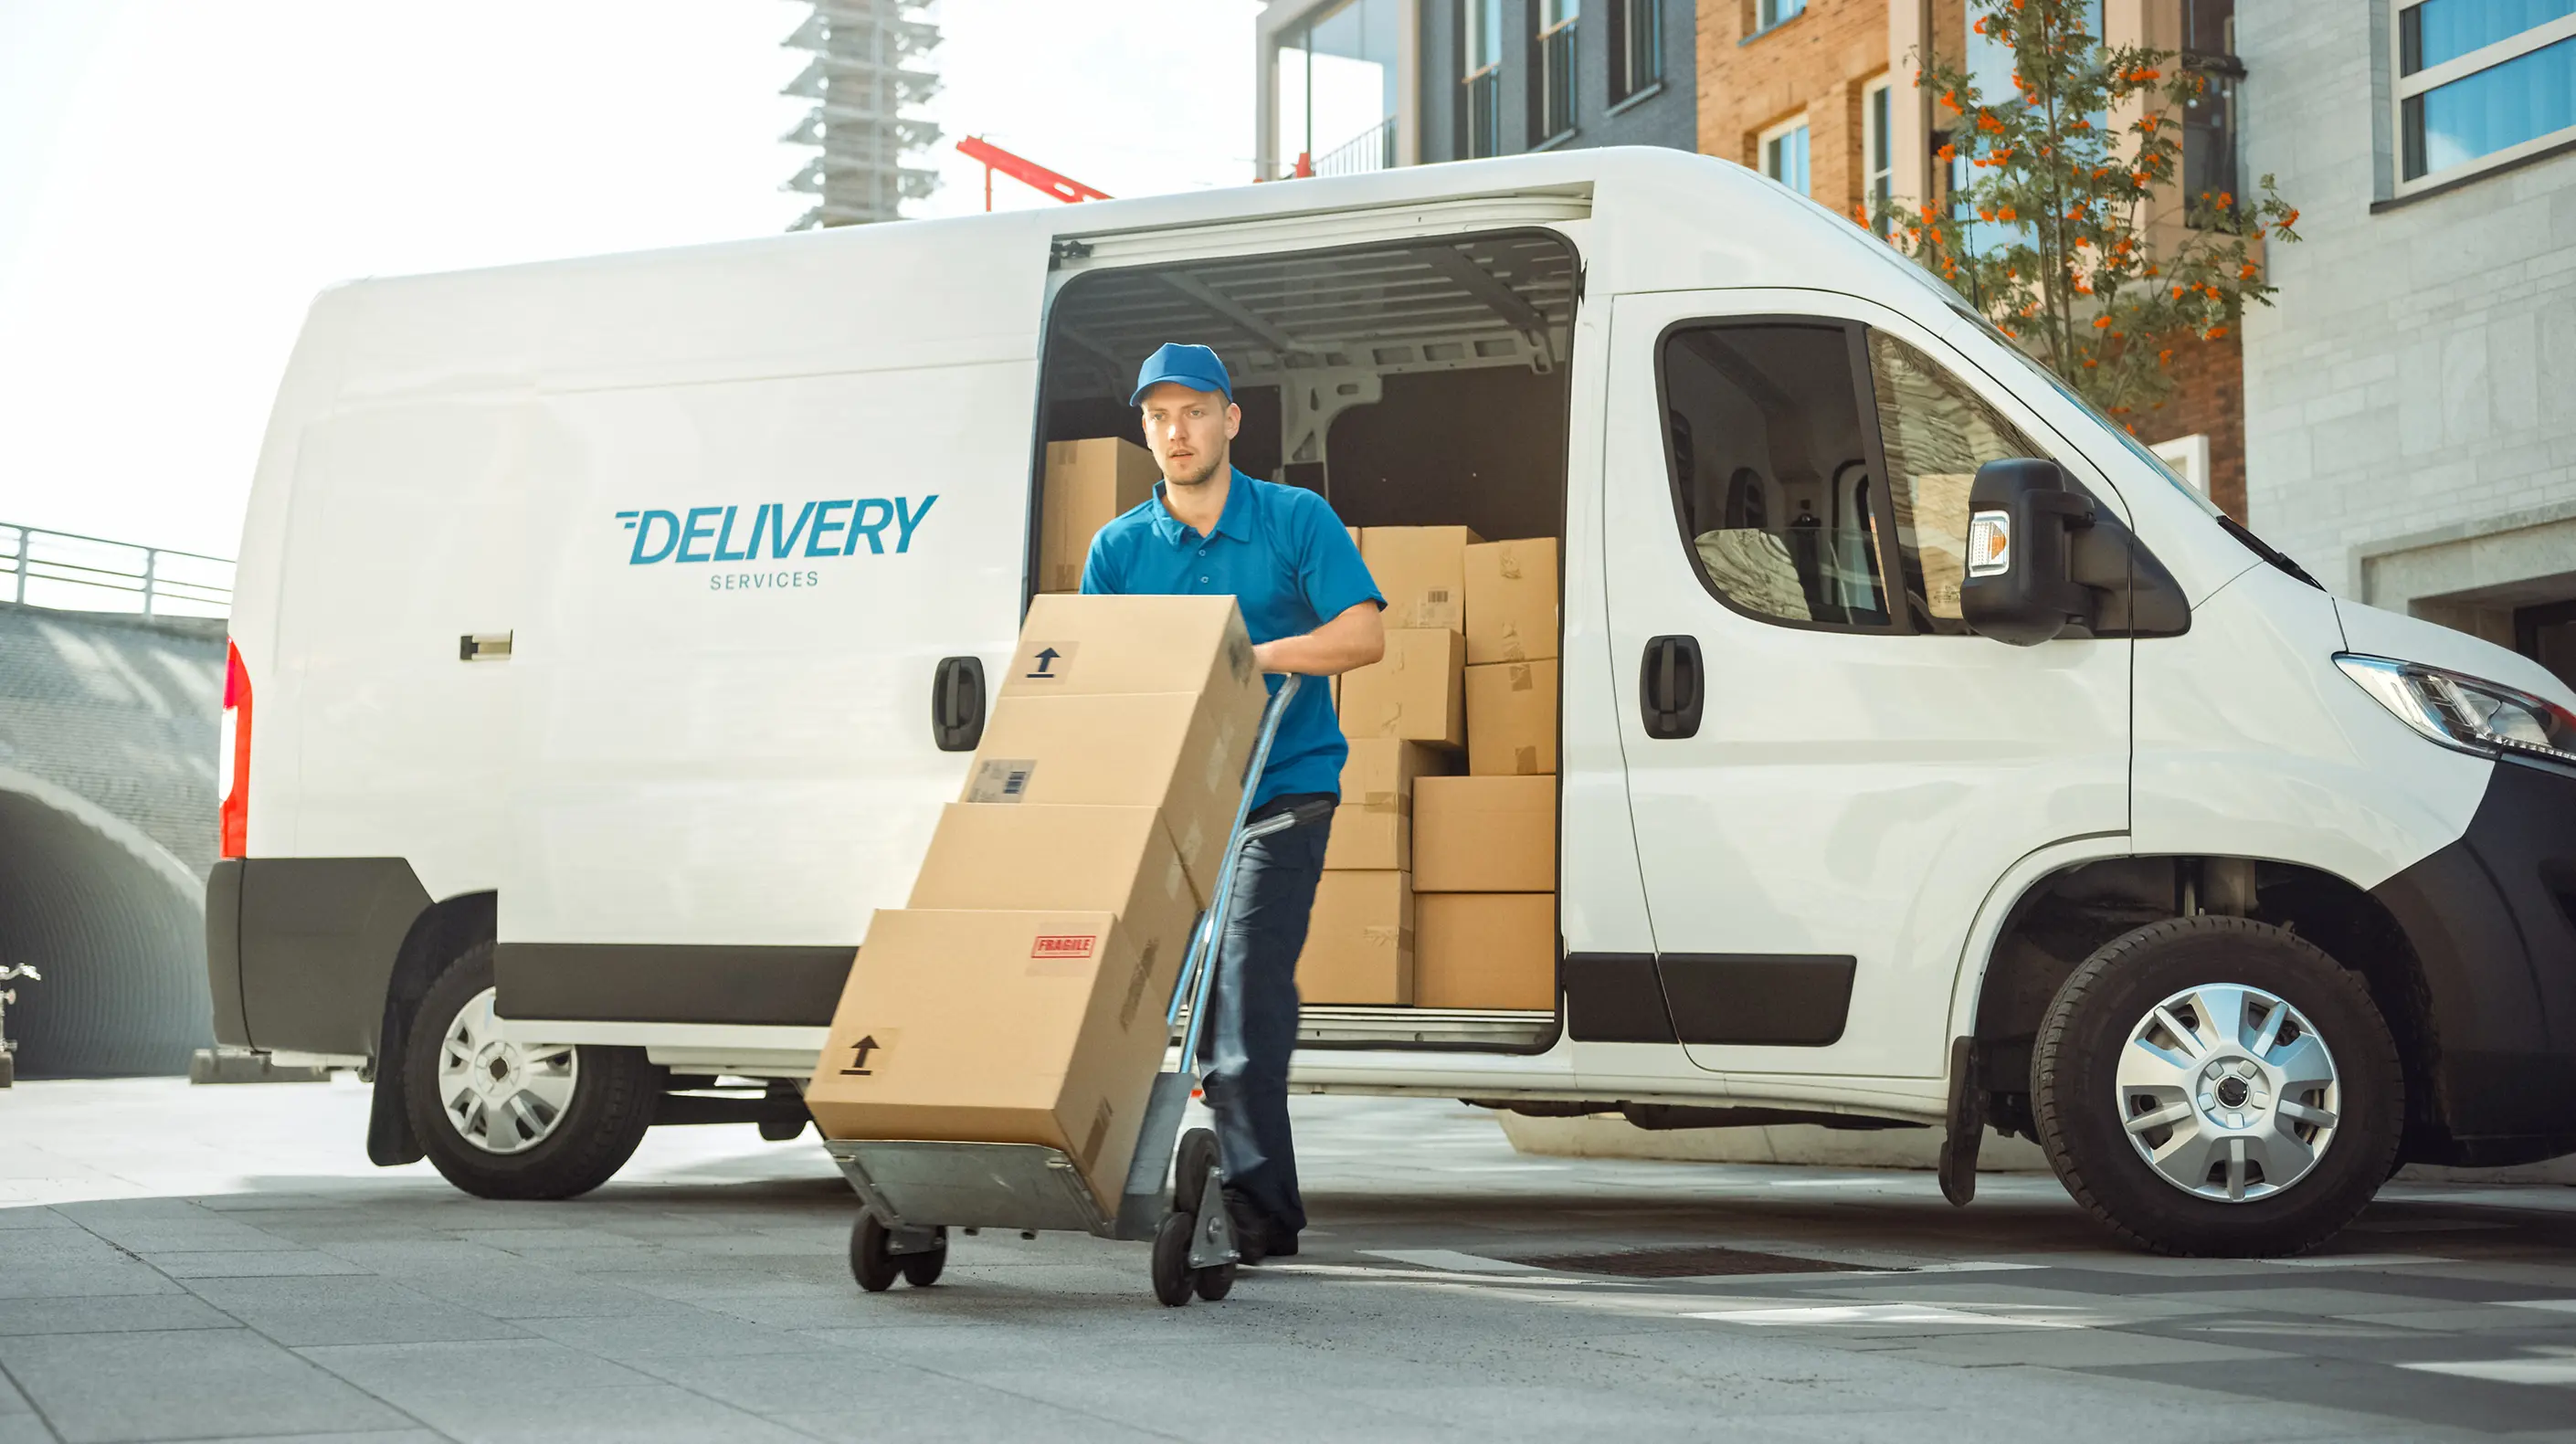 The delivery driver removing packages from his van in order to bring them to a destination